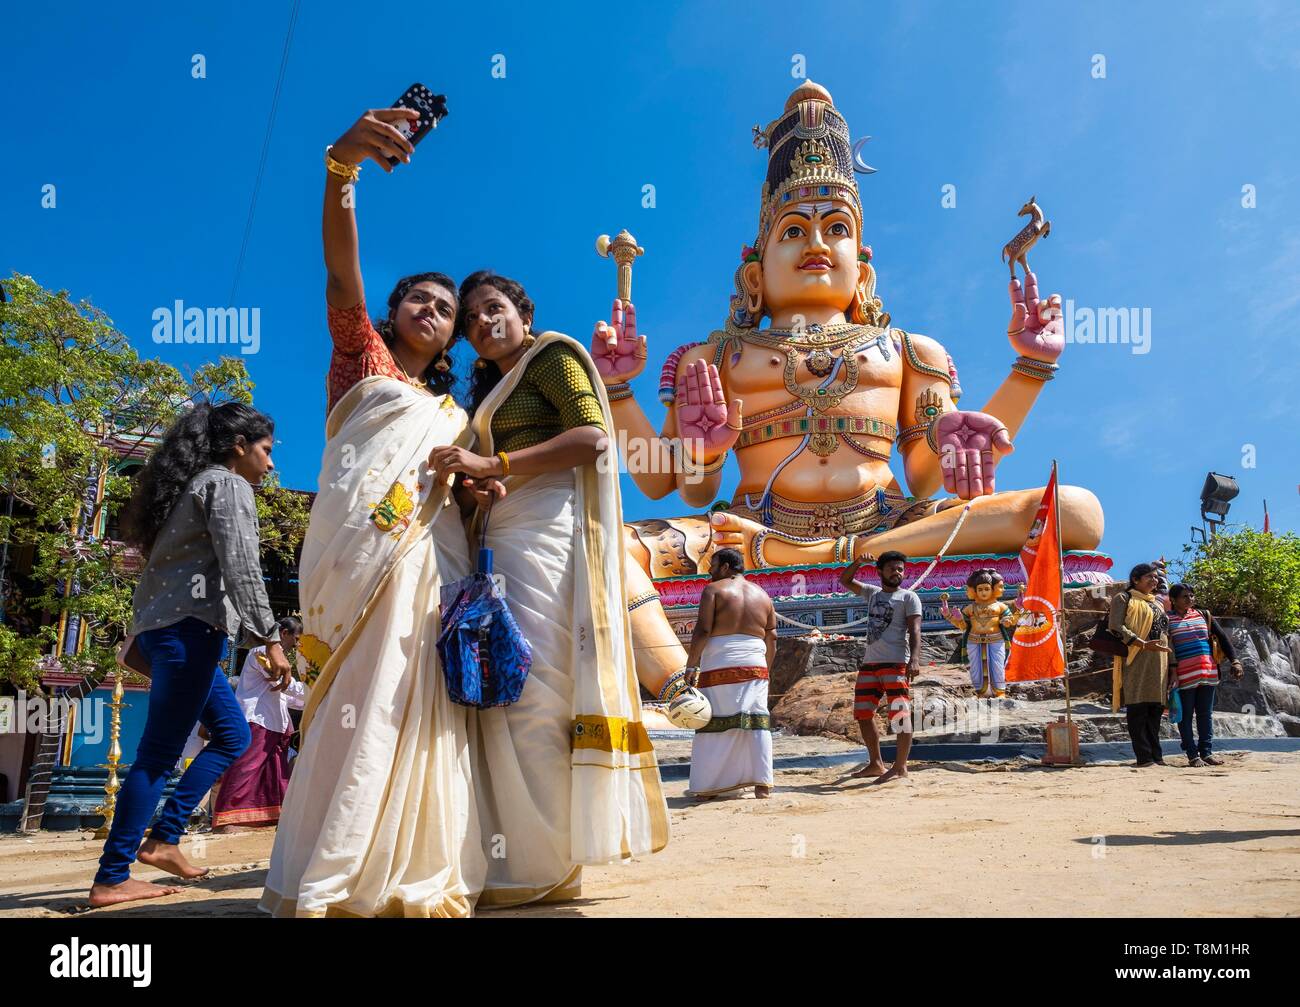 Sri Lanka, Eastern province, Trincomalee (or Trinquemalay), Koneswaram Hindu temple constructed atop Swami Rock promontory, selfie in front of Shiva statue Stock Photo